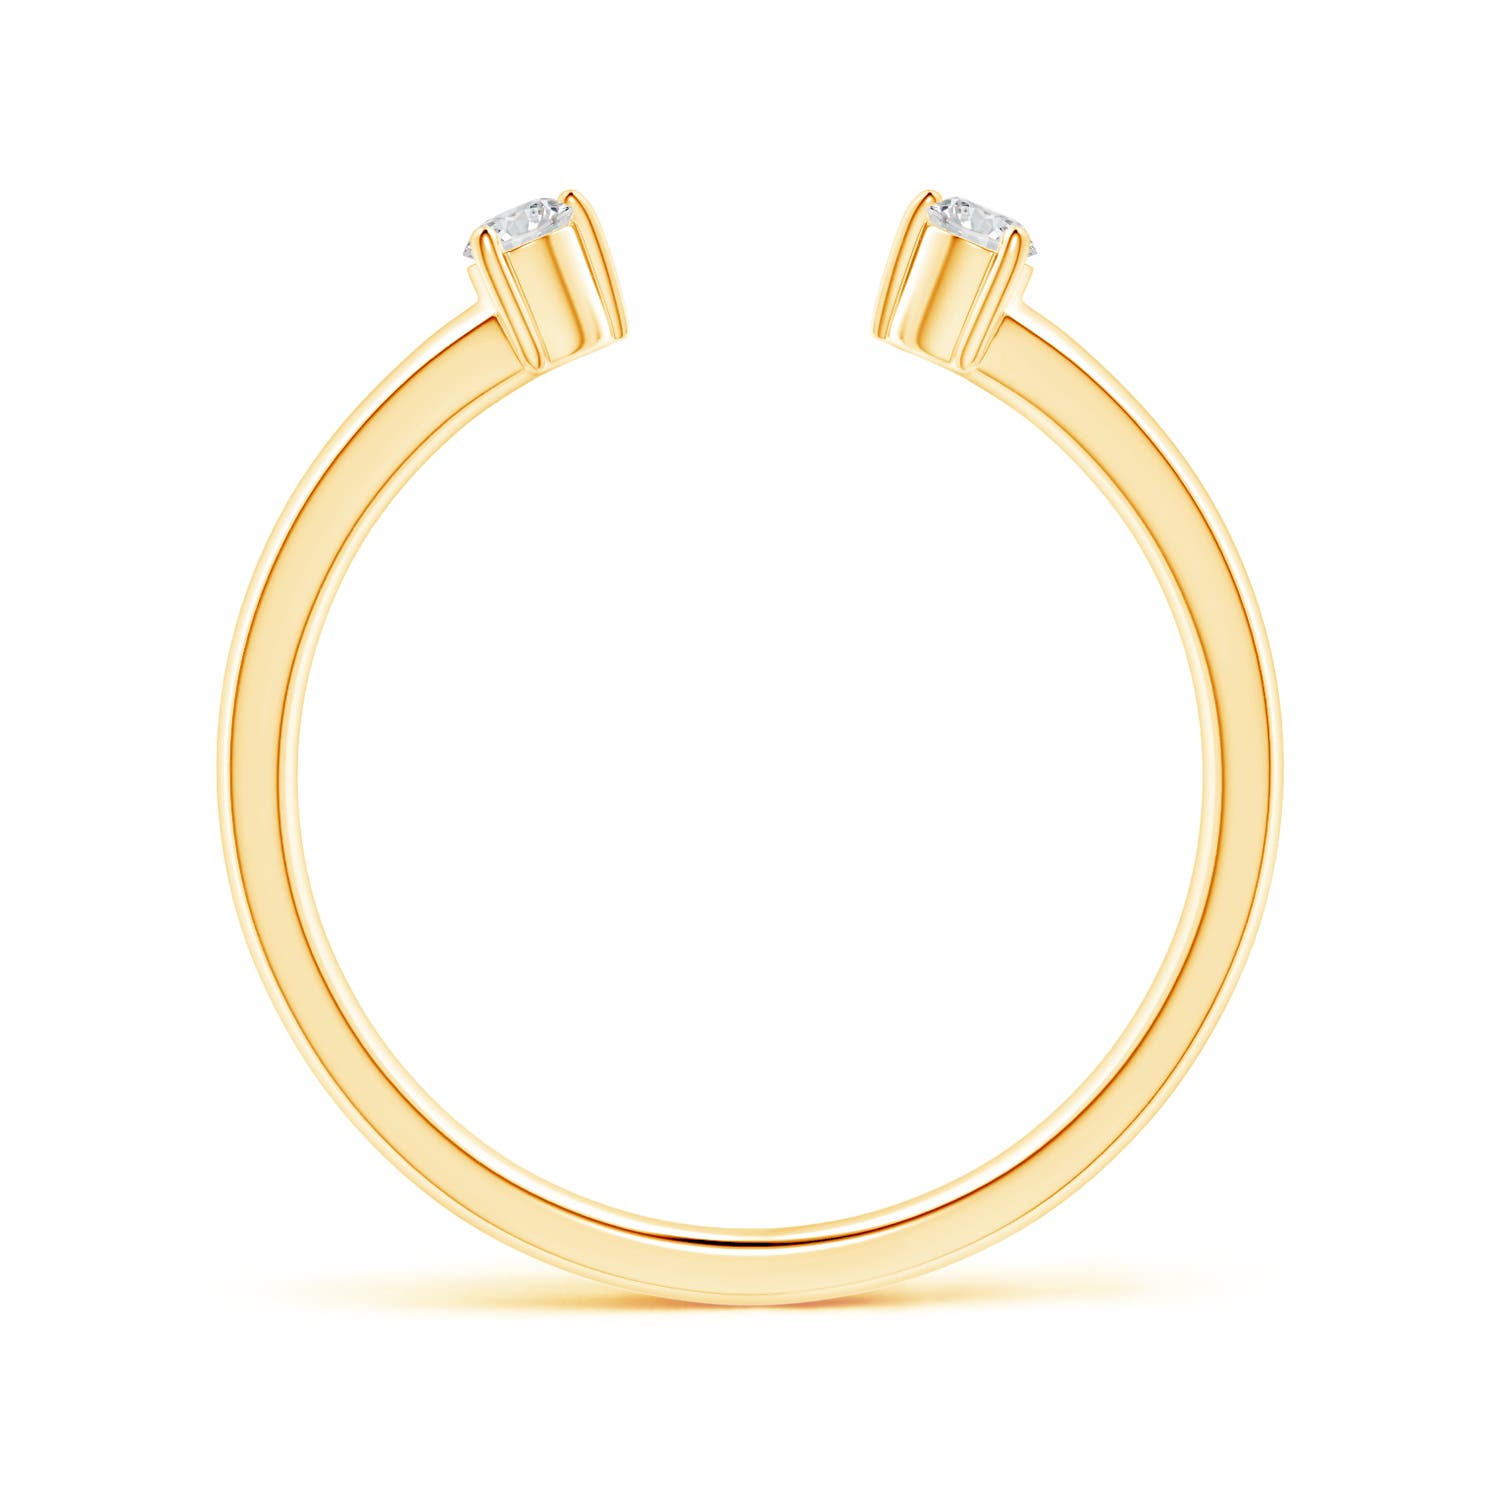 H, SI2 / 0.1 CT / 14 KT Yellow Gold